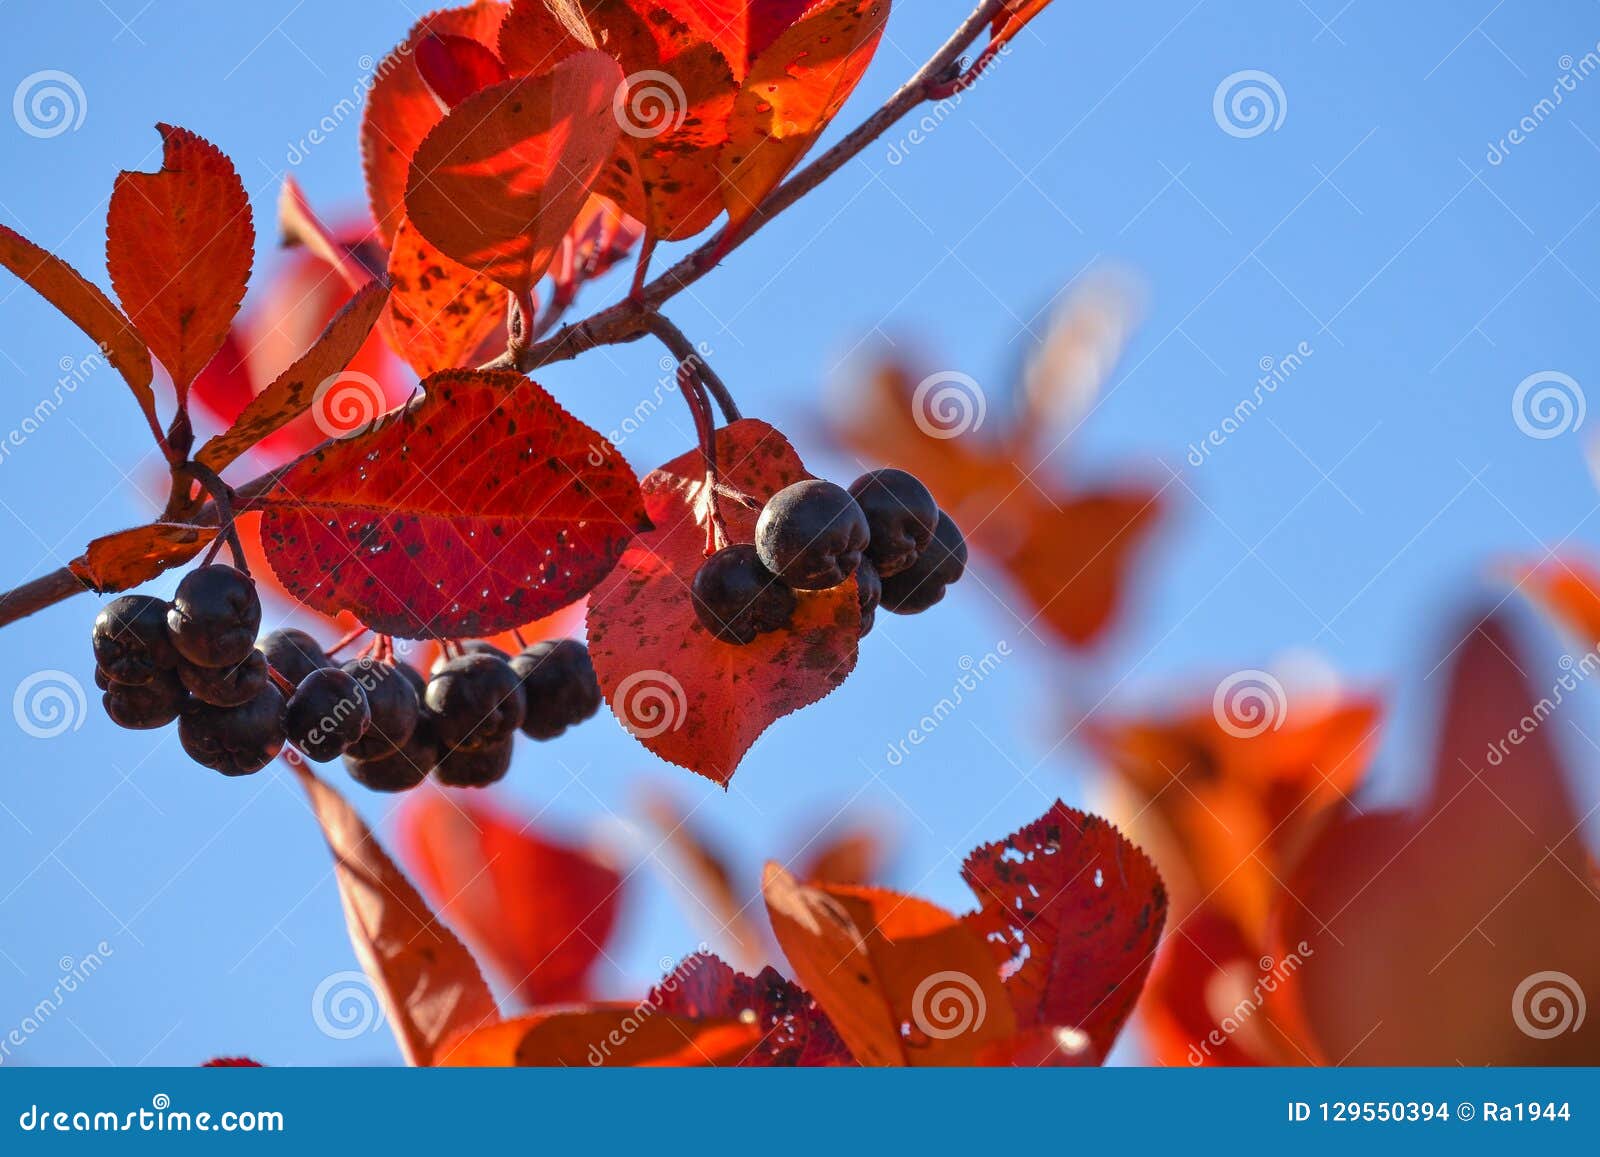 black chokeberry aronia melanocarpa. red leaves against the blue sky. autumn sunny day.